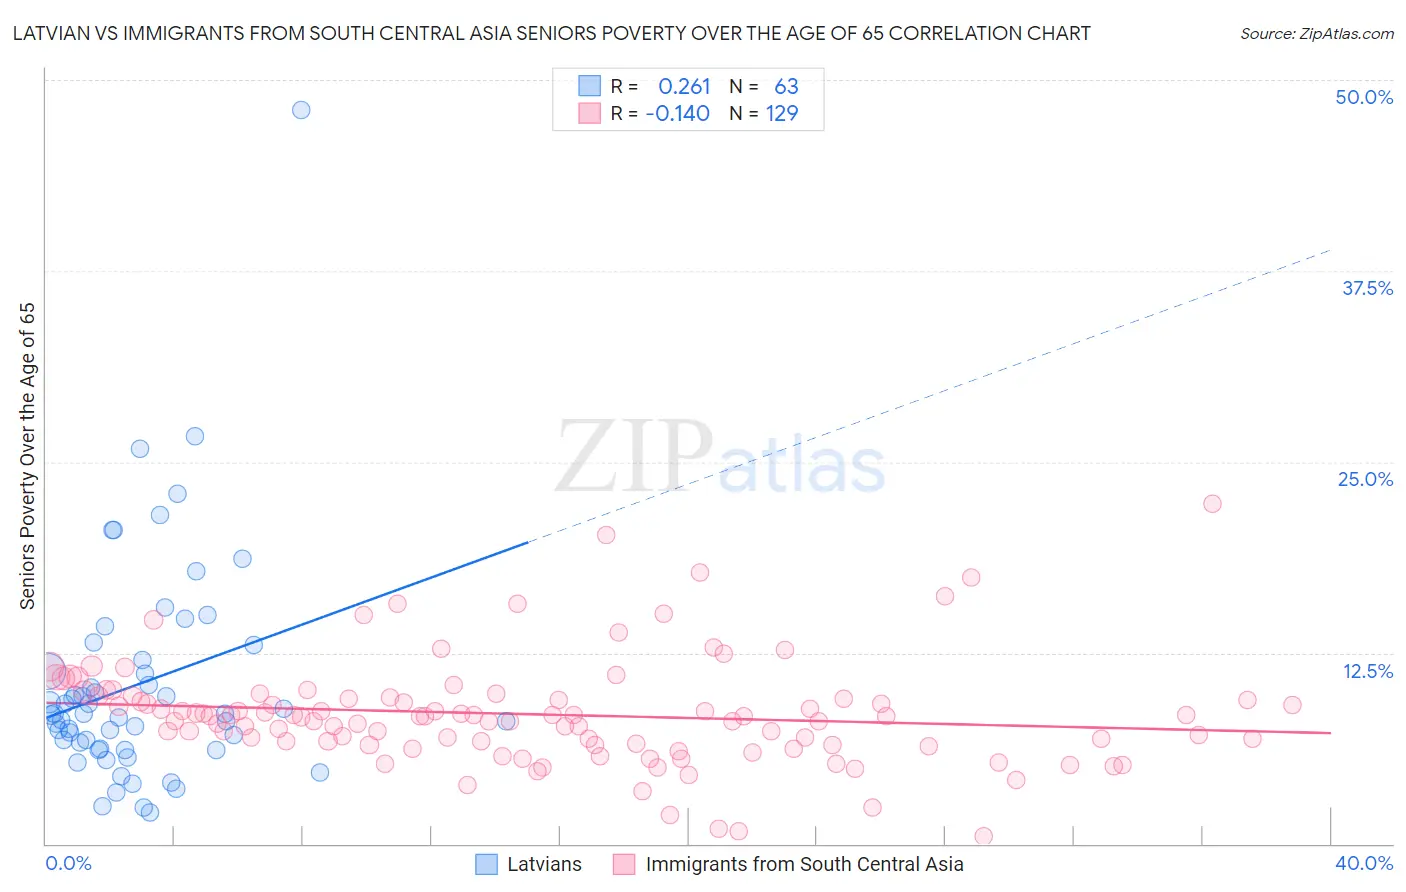 Latvian vs Immigrants from South Central Asia Seniors Poverty Over the Age of 65